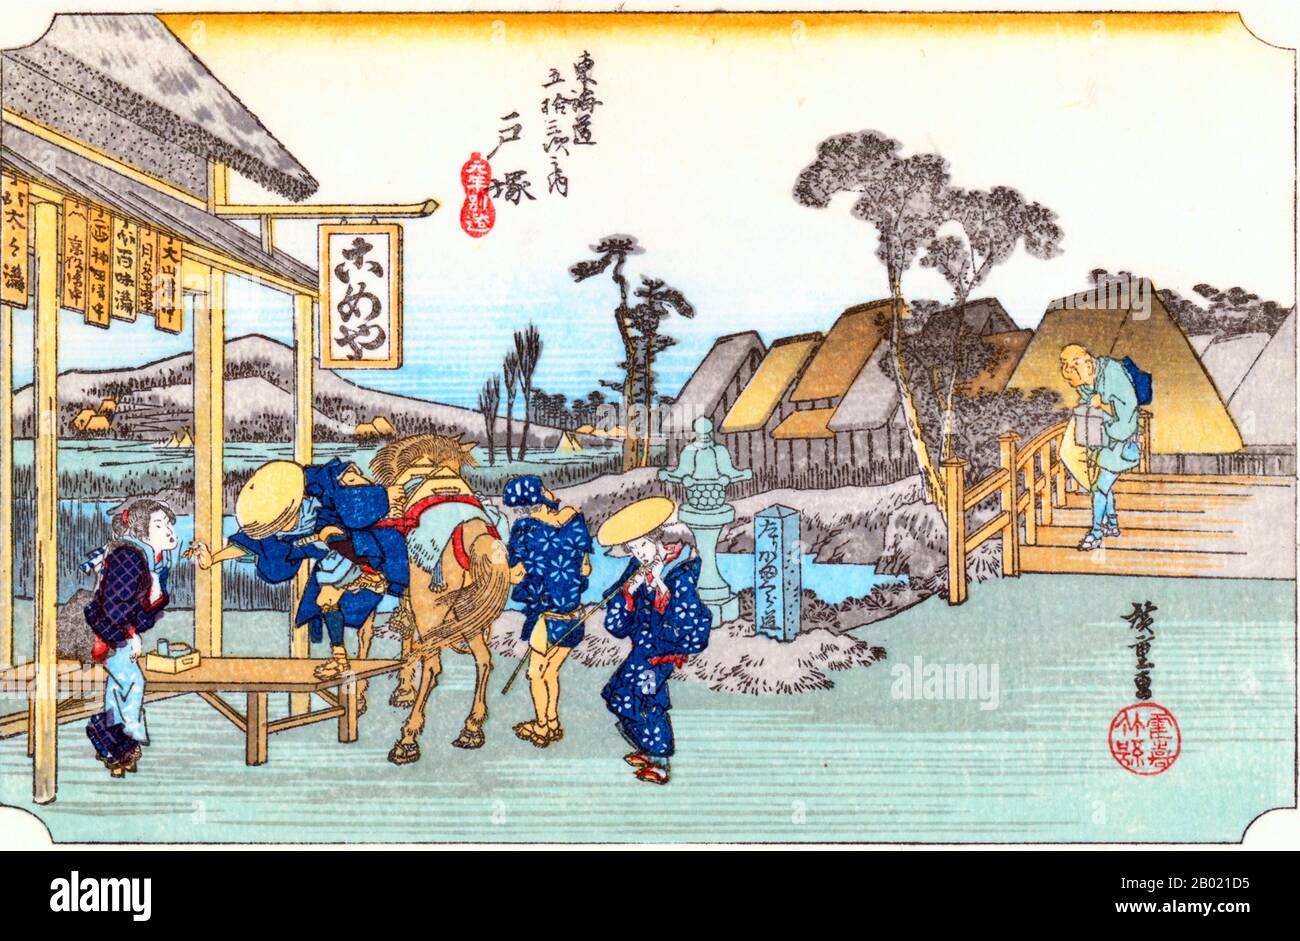 Totsuka: A man dismounting from his horse in front of an open tea-house, while a waitress stands by to receive him. Those who left Edo in the early morning reached here by evening and spent their first night at this this station. Beyond this station, the highway was lined with finely shaped pine trees.  Utagawa Hiroshige (歌川 広重, 1797 – October 12, 1858) was a Japanese ukiyo-e artist, and one of the last great artists in that tradition. He was also referred to as Andō Hiroshige (安藤 広重) (an irregular combination of family name and art name) and by the art name of Ichiyūsai Hiroshige (一幽斎廣重).  Th Stock Photo